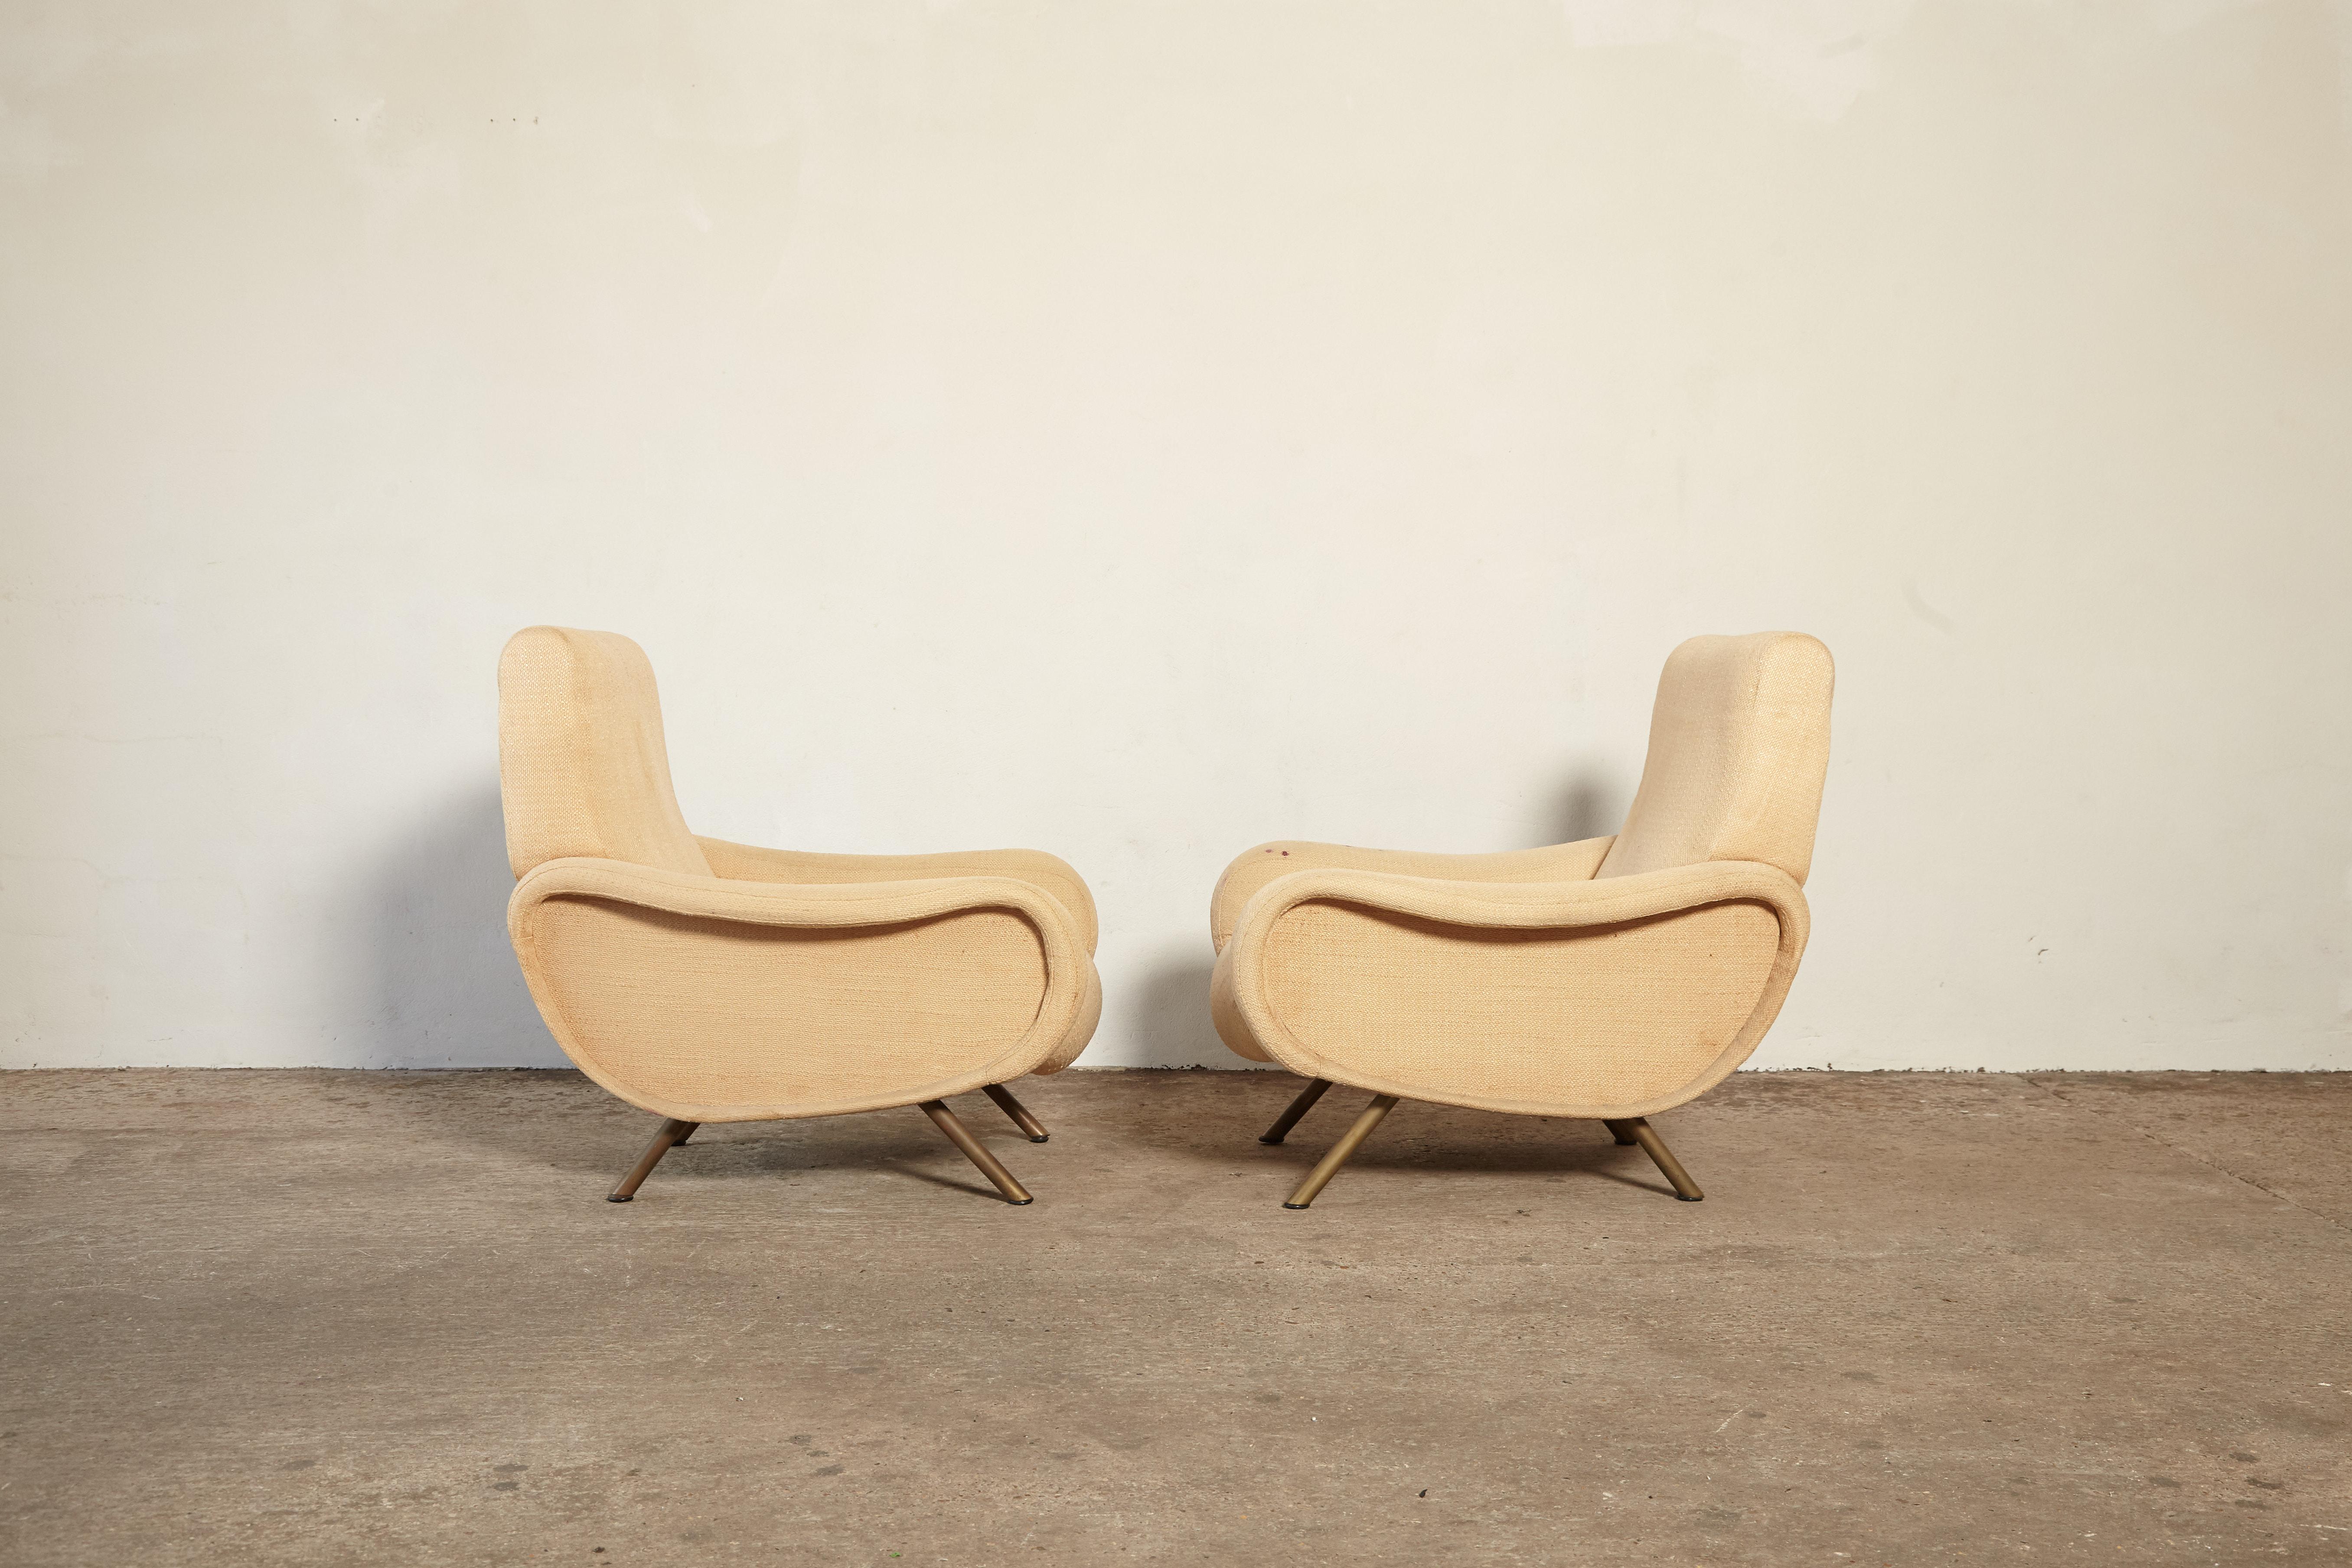 A pair of original and authentic Marco Zanuso Lady chairs, Arflex, France/Italy, 1950s. The upholstery is worn and stained so the chairs require re-upholstery so the price here includes re-upholstery in customer supplied material. Fast shipping